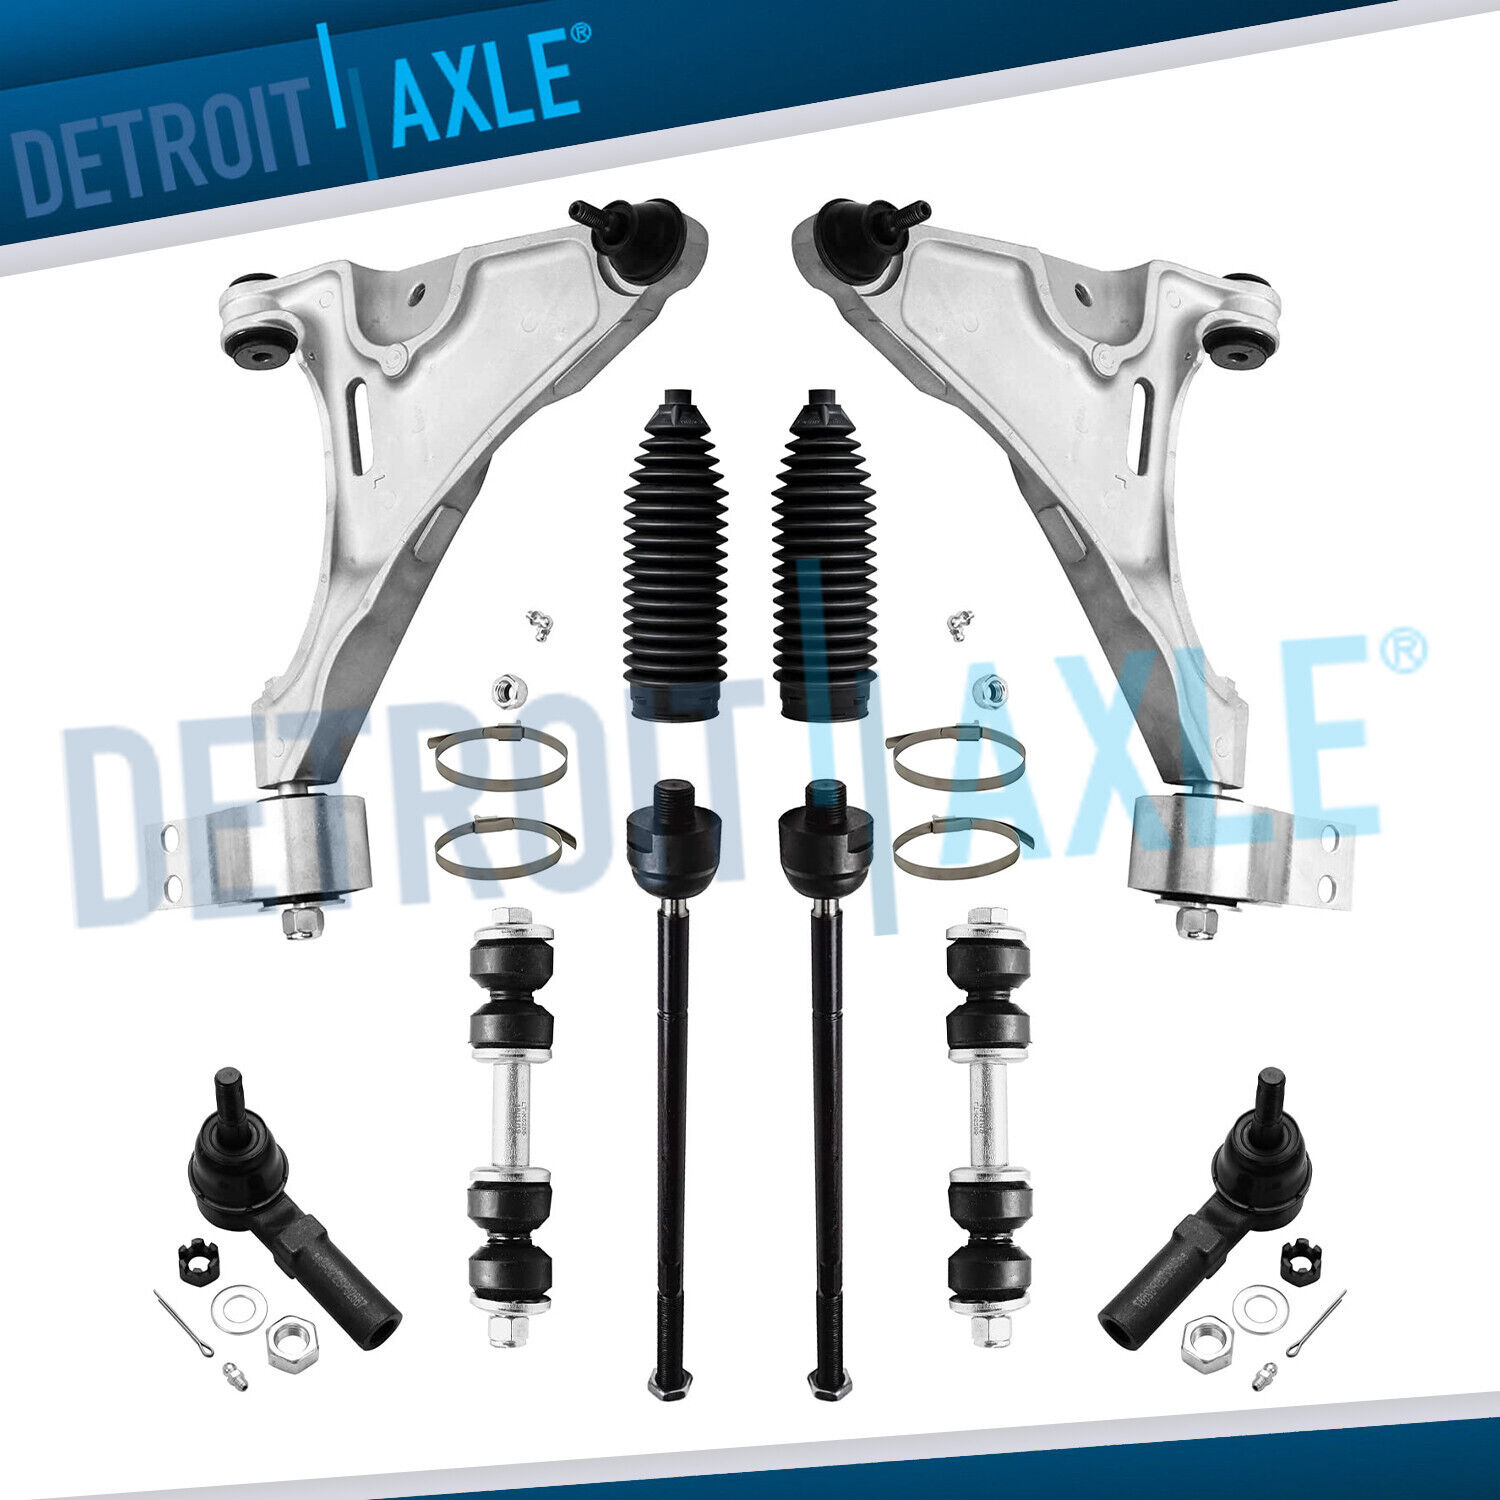 10pc Front Lower Control Arms + Tie Rods for 2006-11 Buick Lucerne Cadillac DTS 